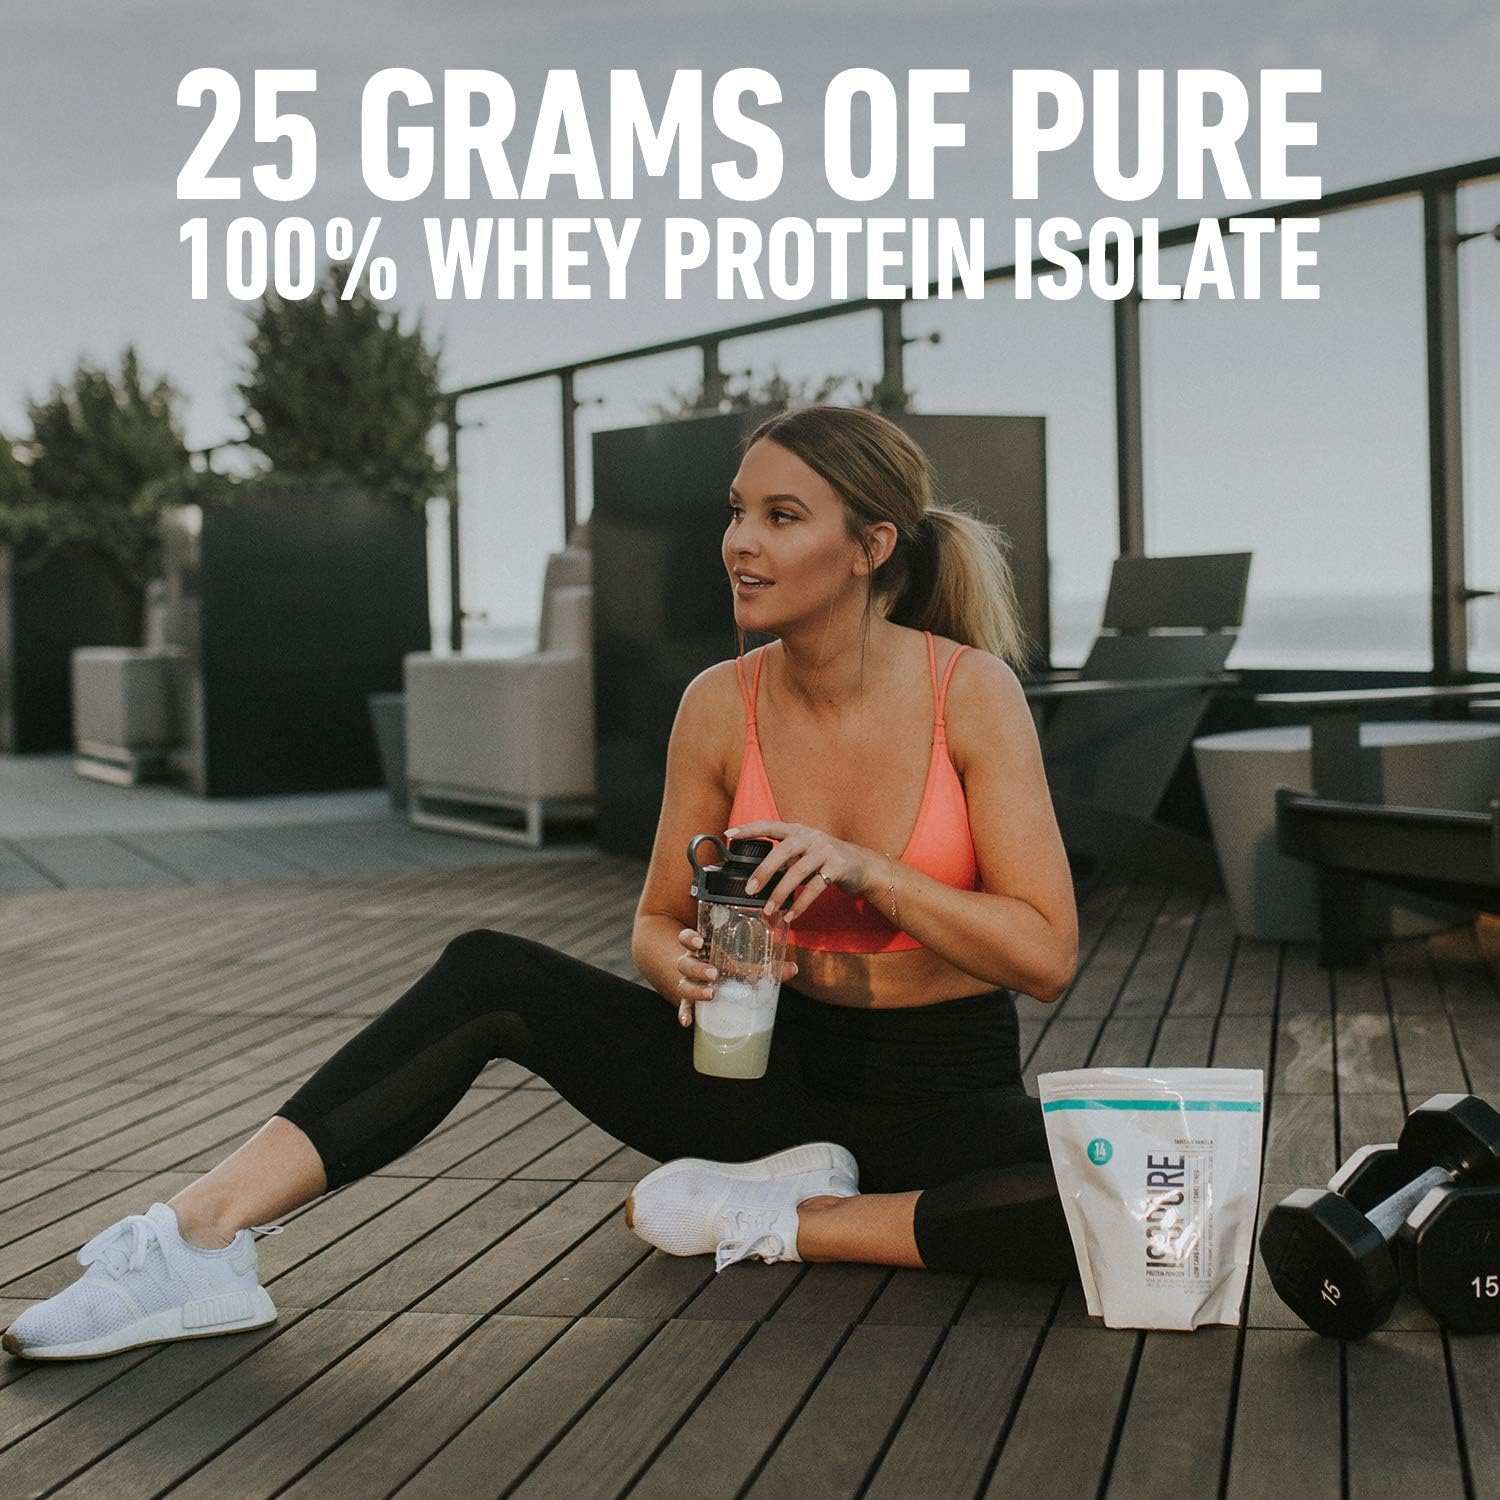 Isopure Protein Powder, Whey Protein Isolate Powder, 25g Protein, Low Carb & Keto Friendly, Naturally Sweetened & Flavored, Flavor: Chocolate, 14 Servings, 1 Pound : Health & Household